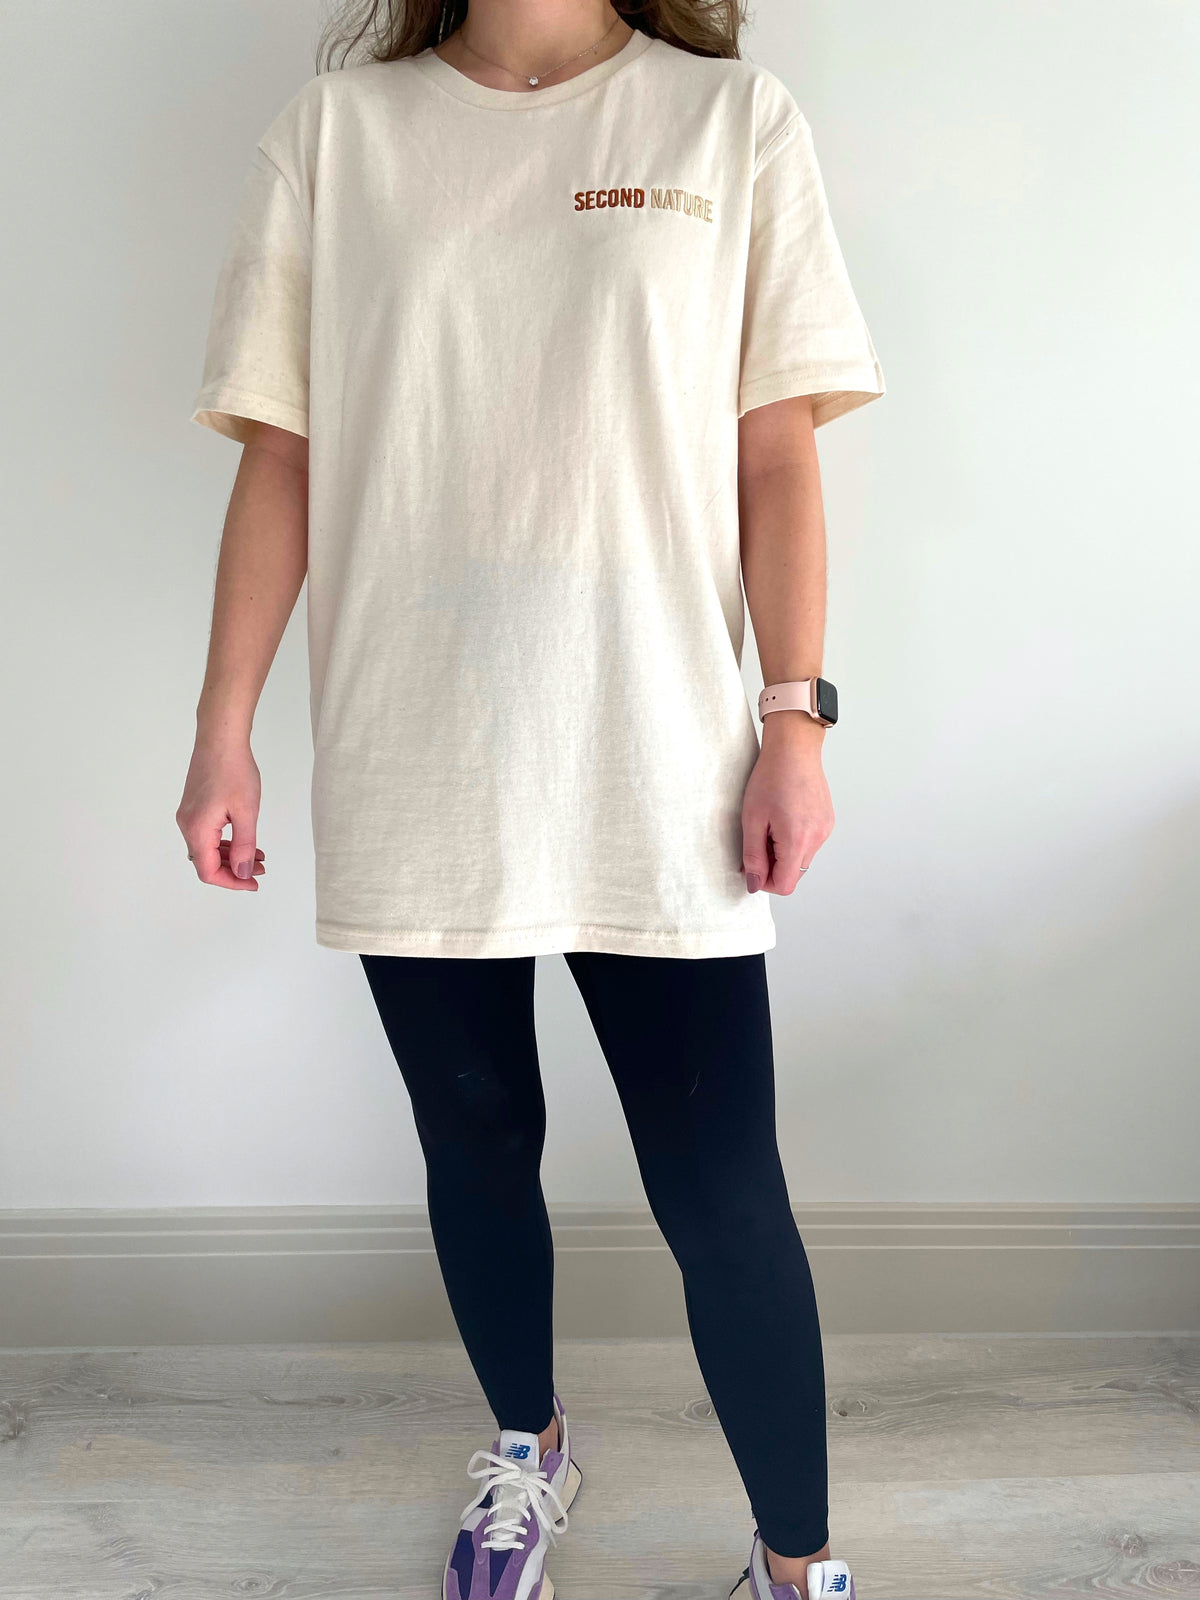 Oversized Cream T-shirt with Second Nature embroidery